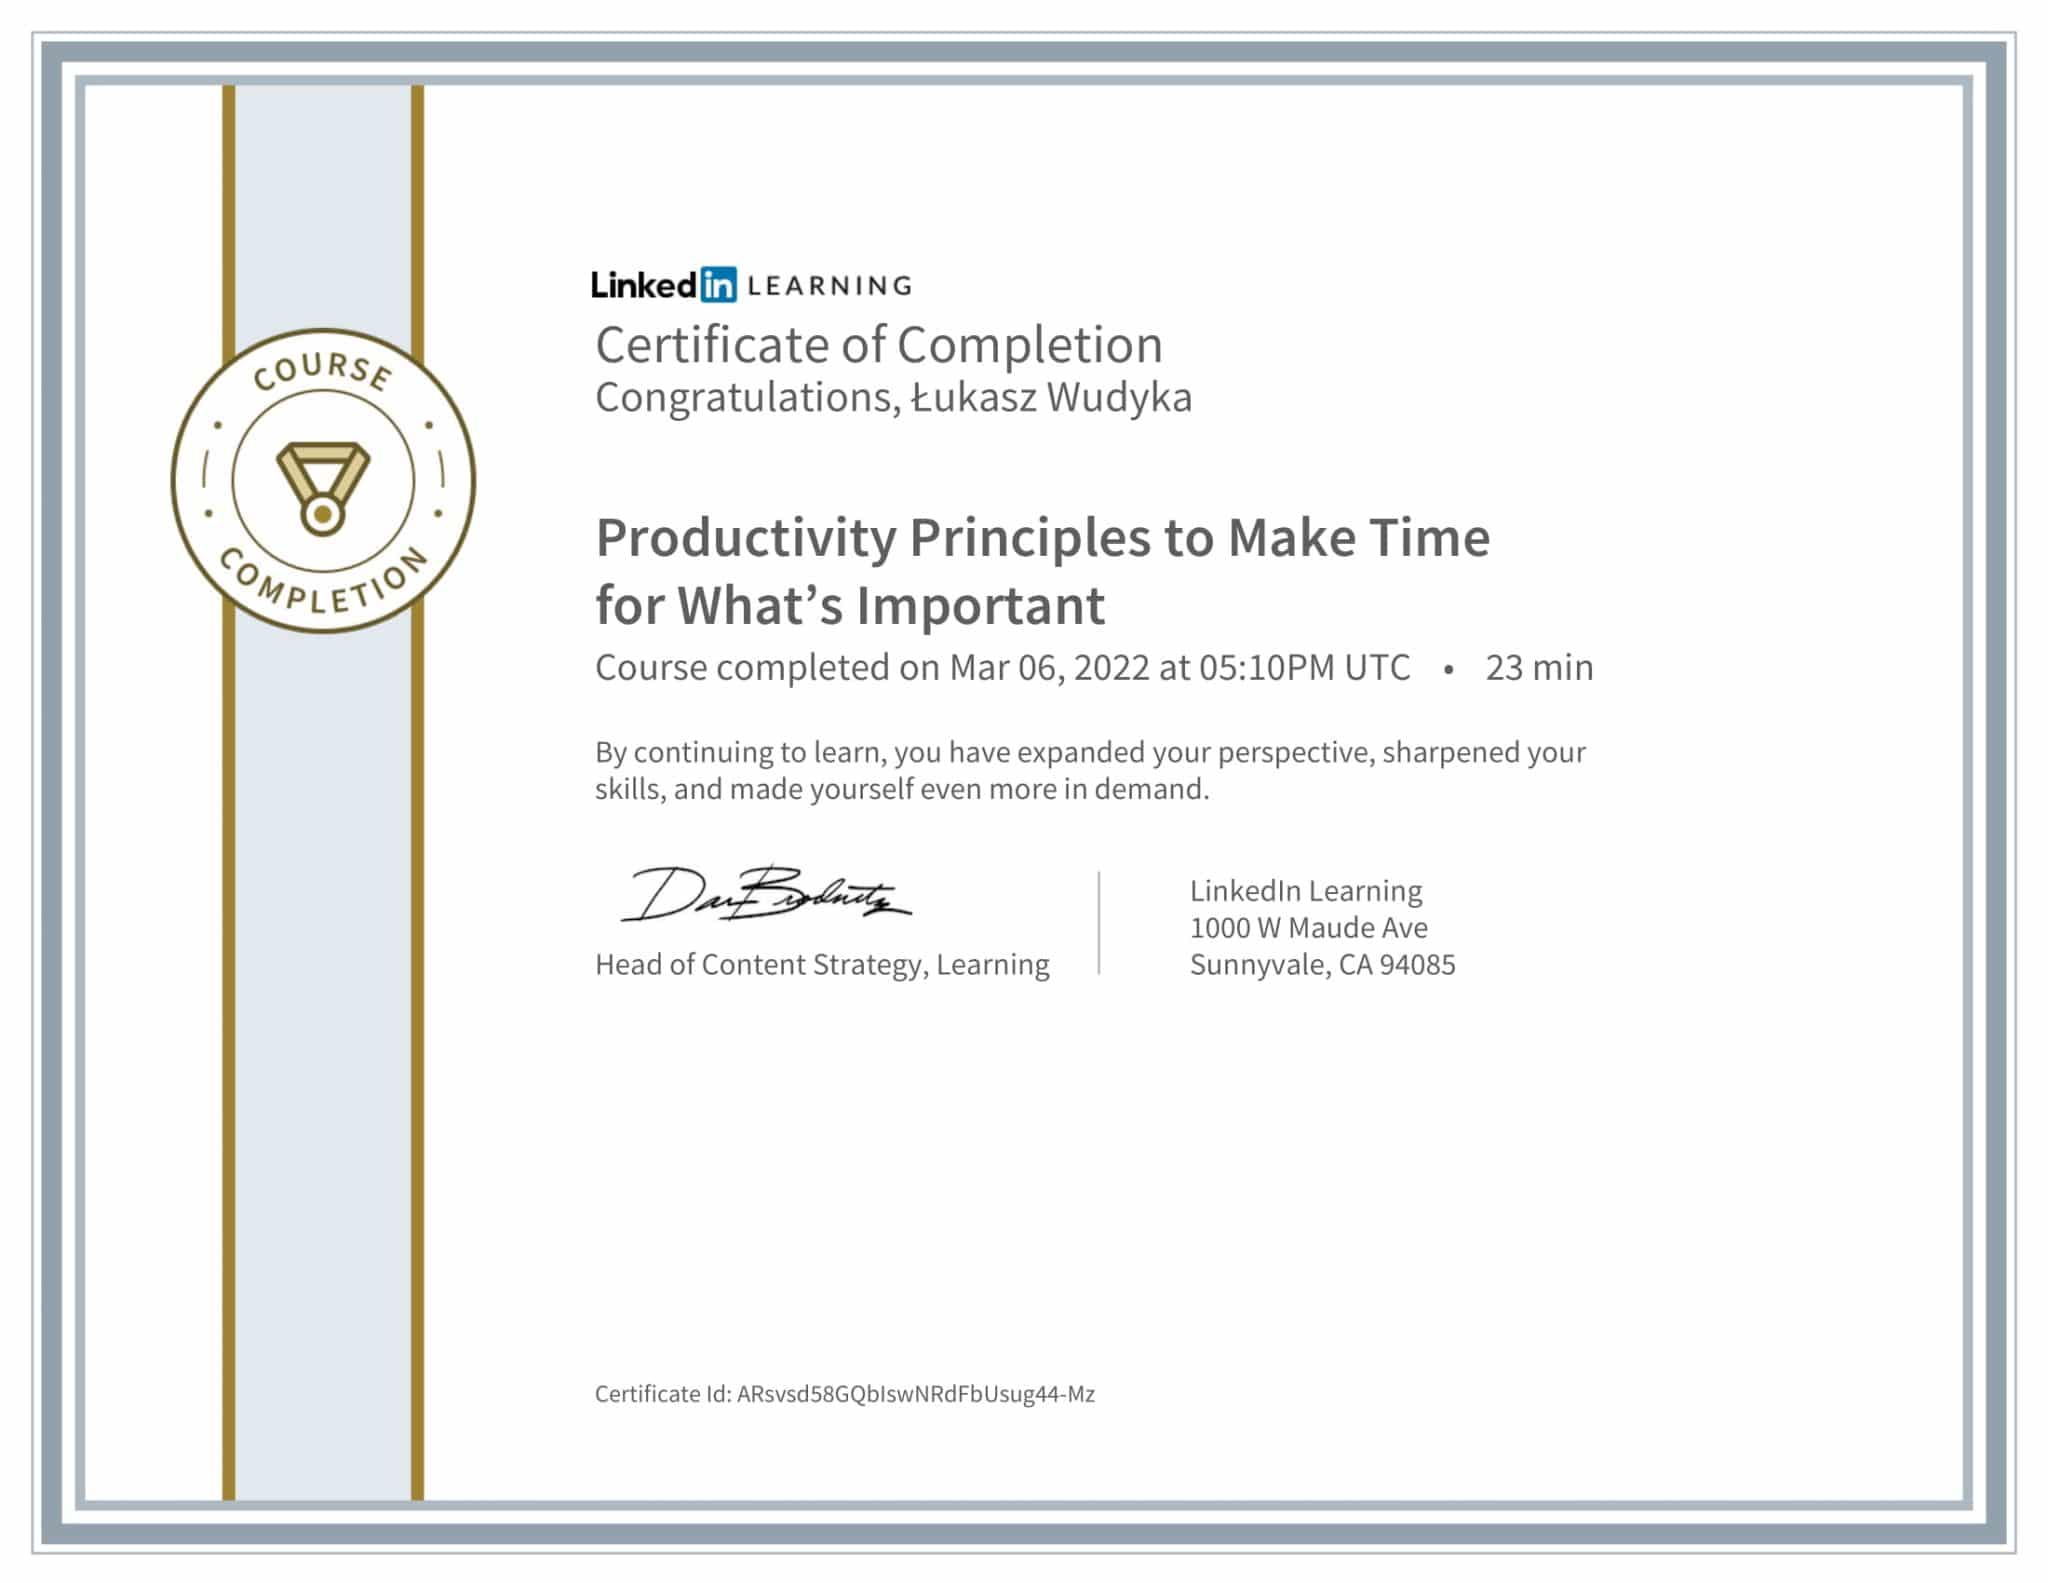 CertificateOfCompletion_Productivity Principles to Make Time for Whats Important-1